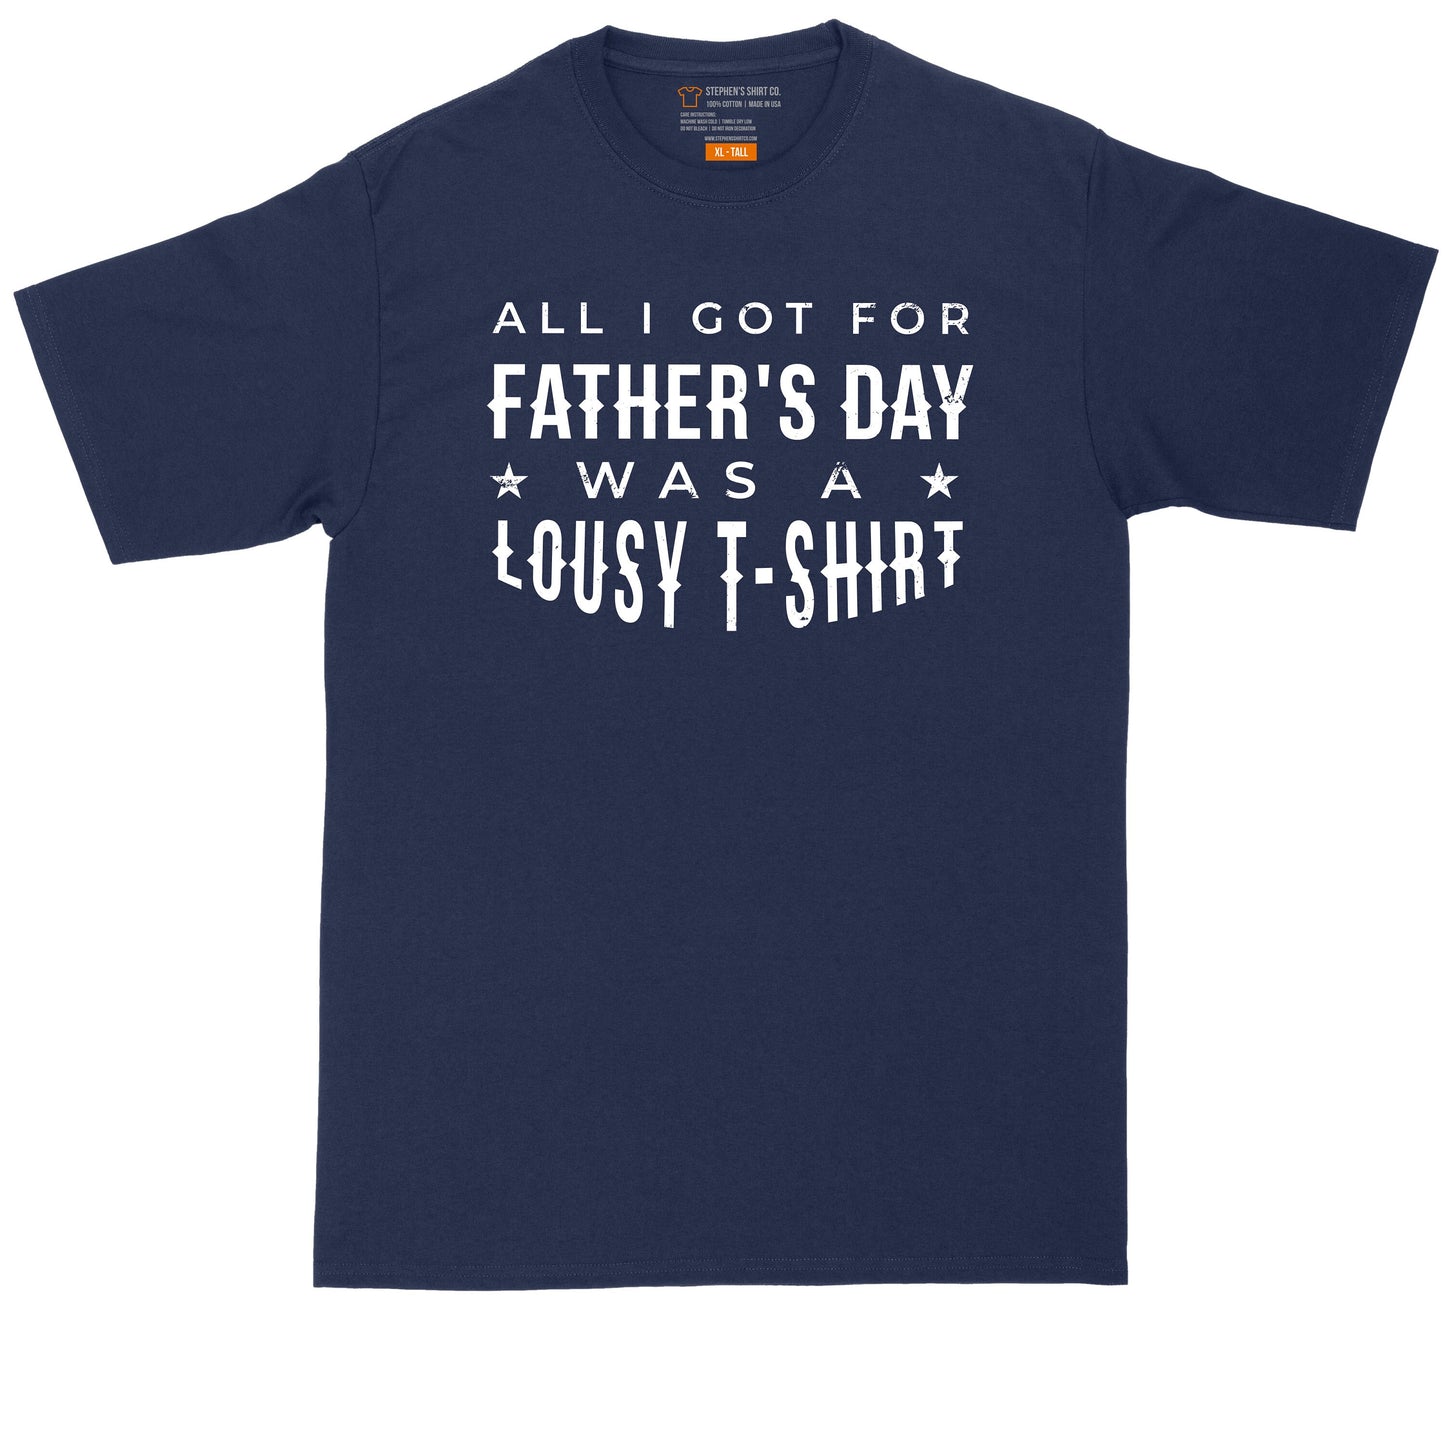 All I Got for Fathers Day is a Lousy T-Shirt | Big and Tall Men | Fathers Day Present | Gift for Him